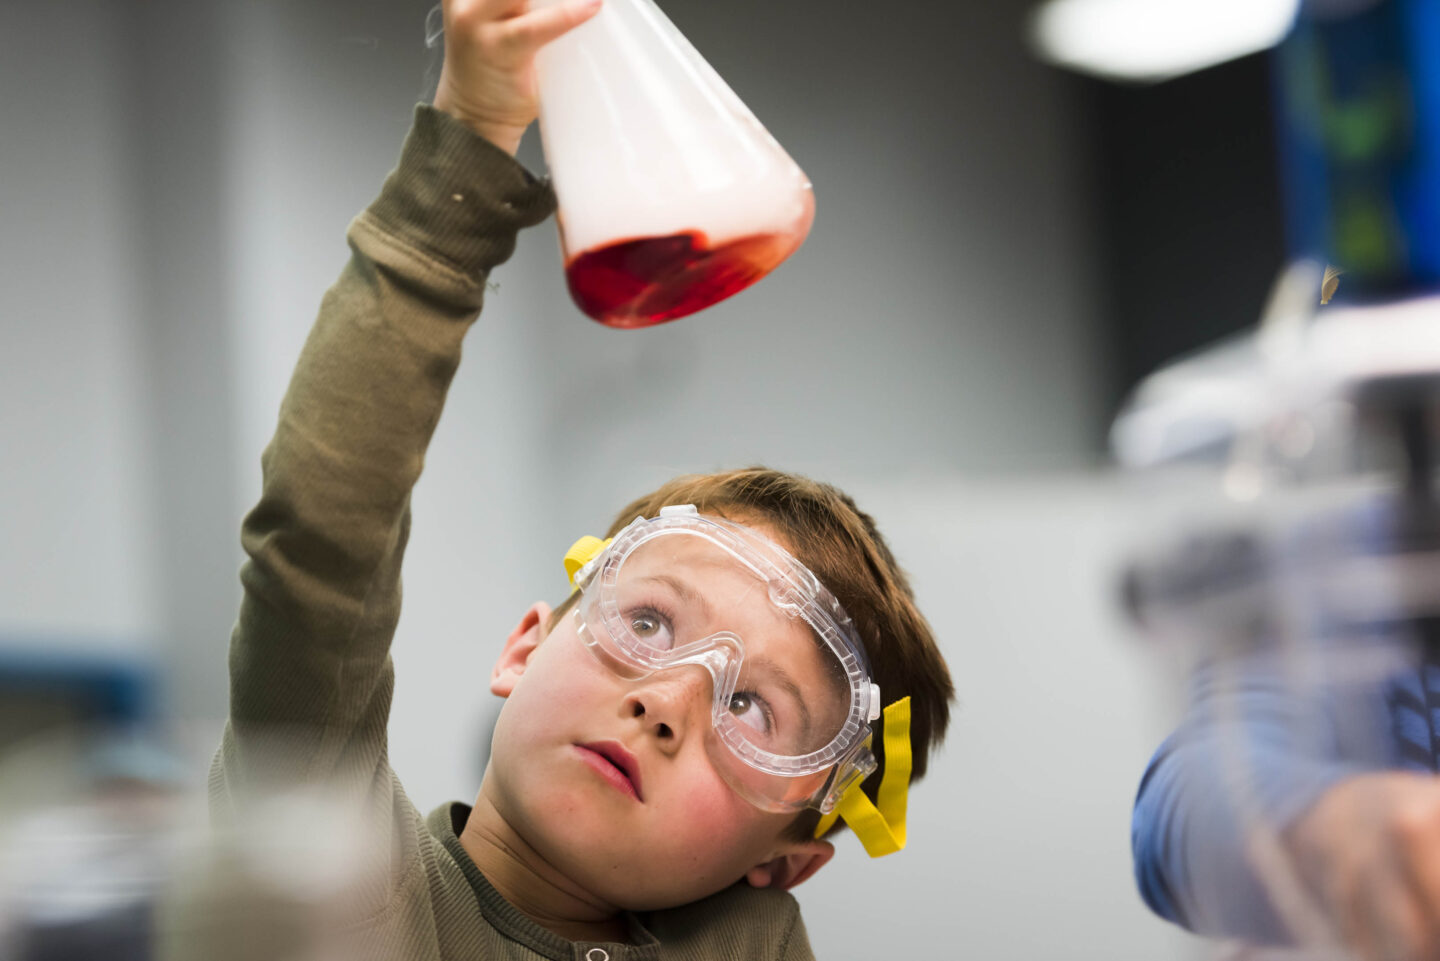 A young person holding up a science beaker with red liquid and wearing goggles